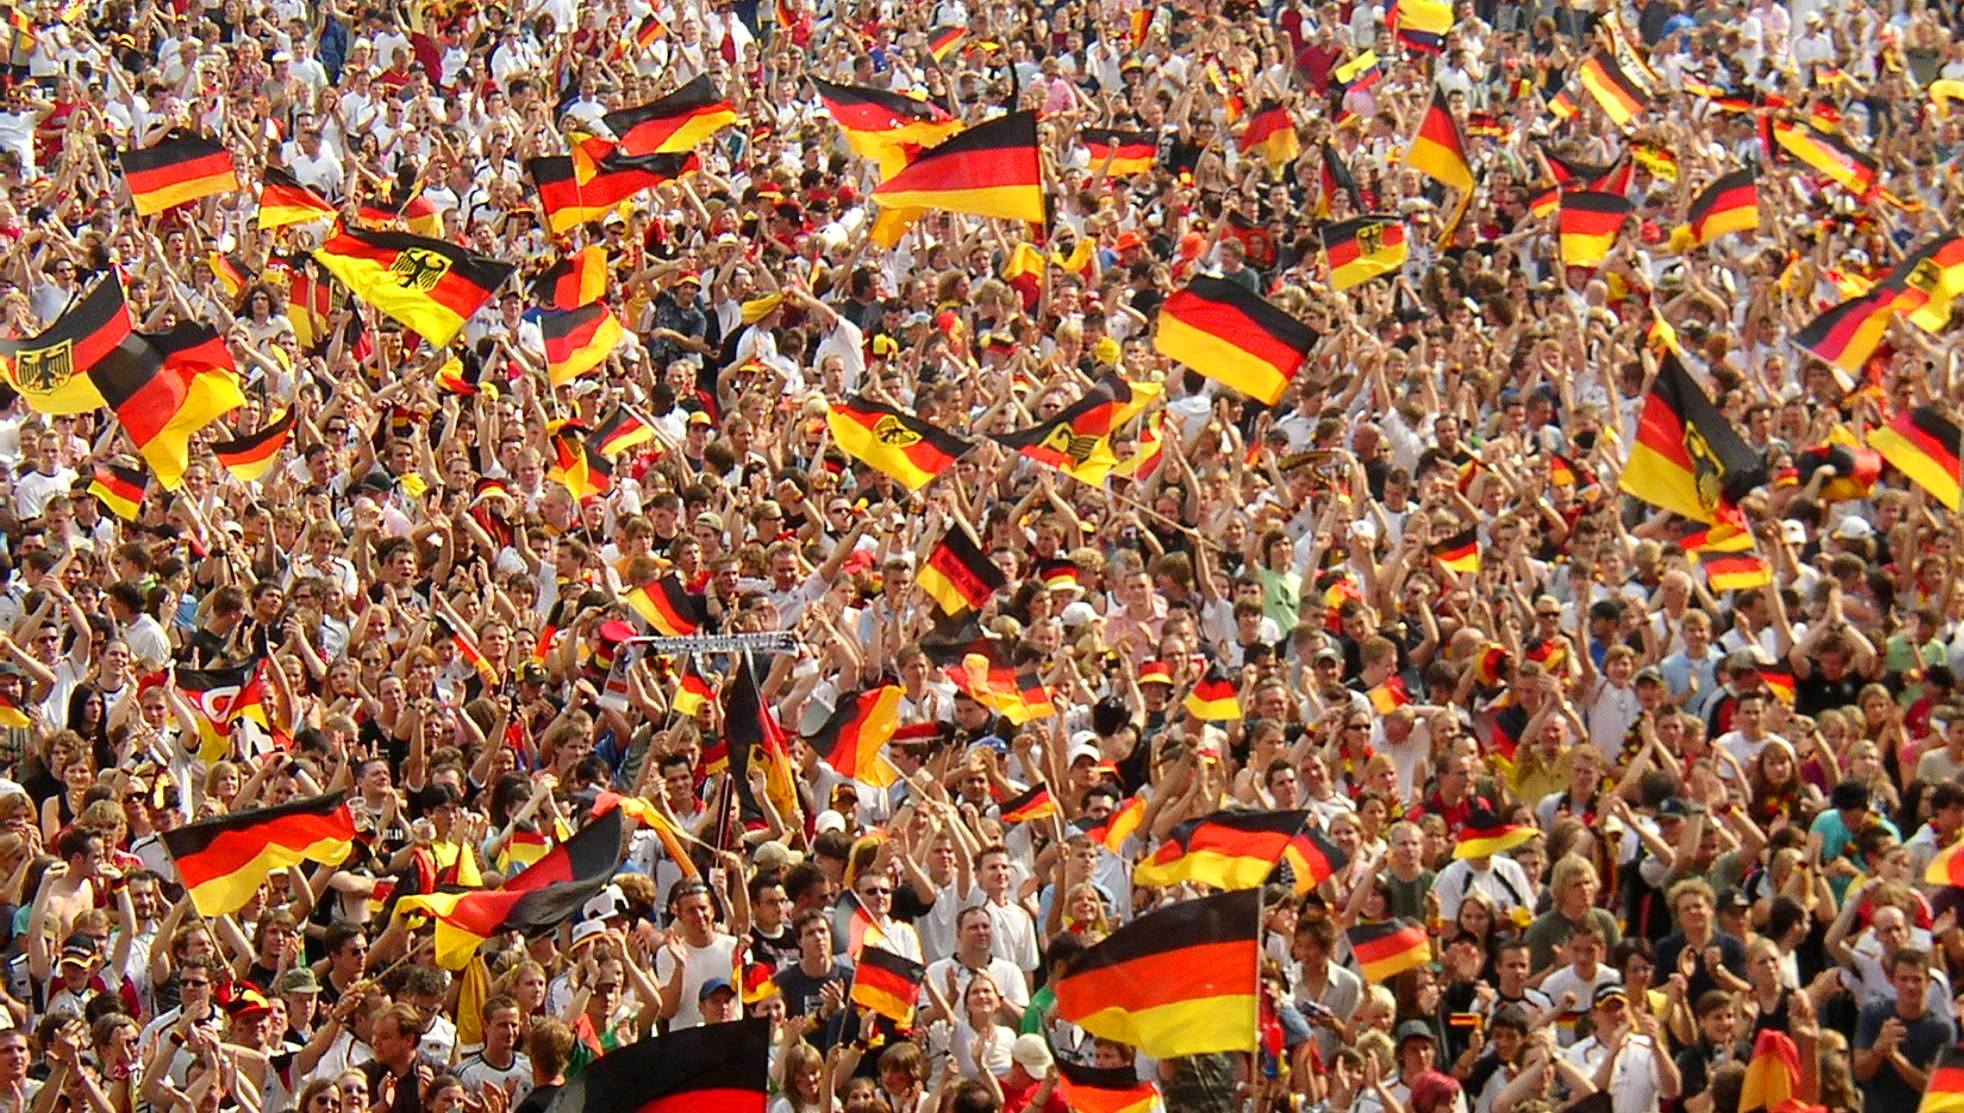 German soccer fans flying the German flag at the Worldcup (photo by Arne Müseler)